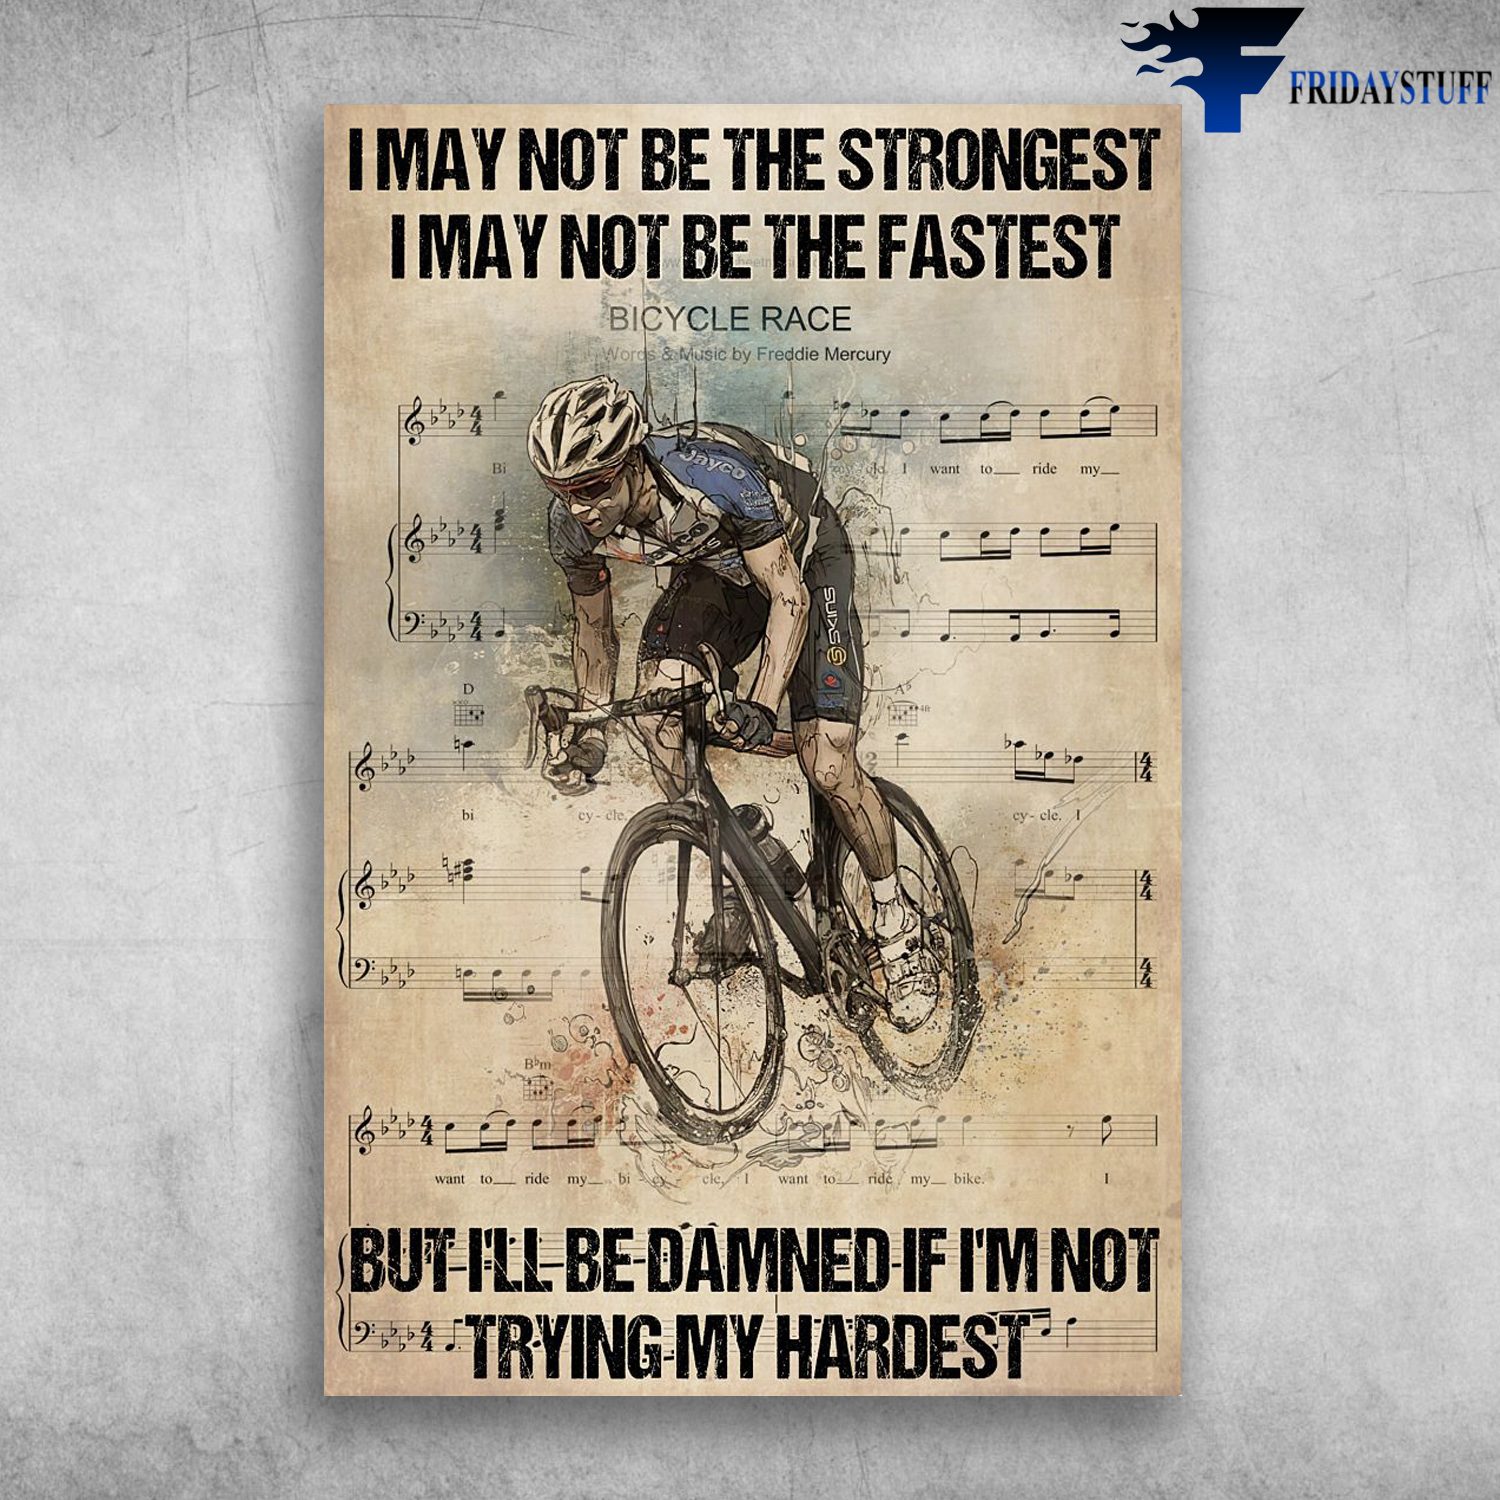 Man Cycling - I May Not Be The Strongest, I May Not Be The Fastest, But I'll Damned If I'm Not Trying My Hardest